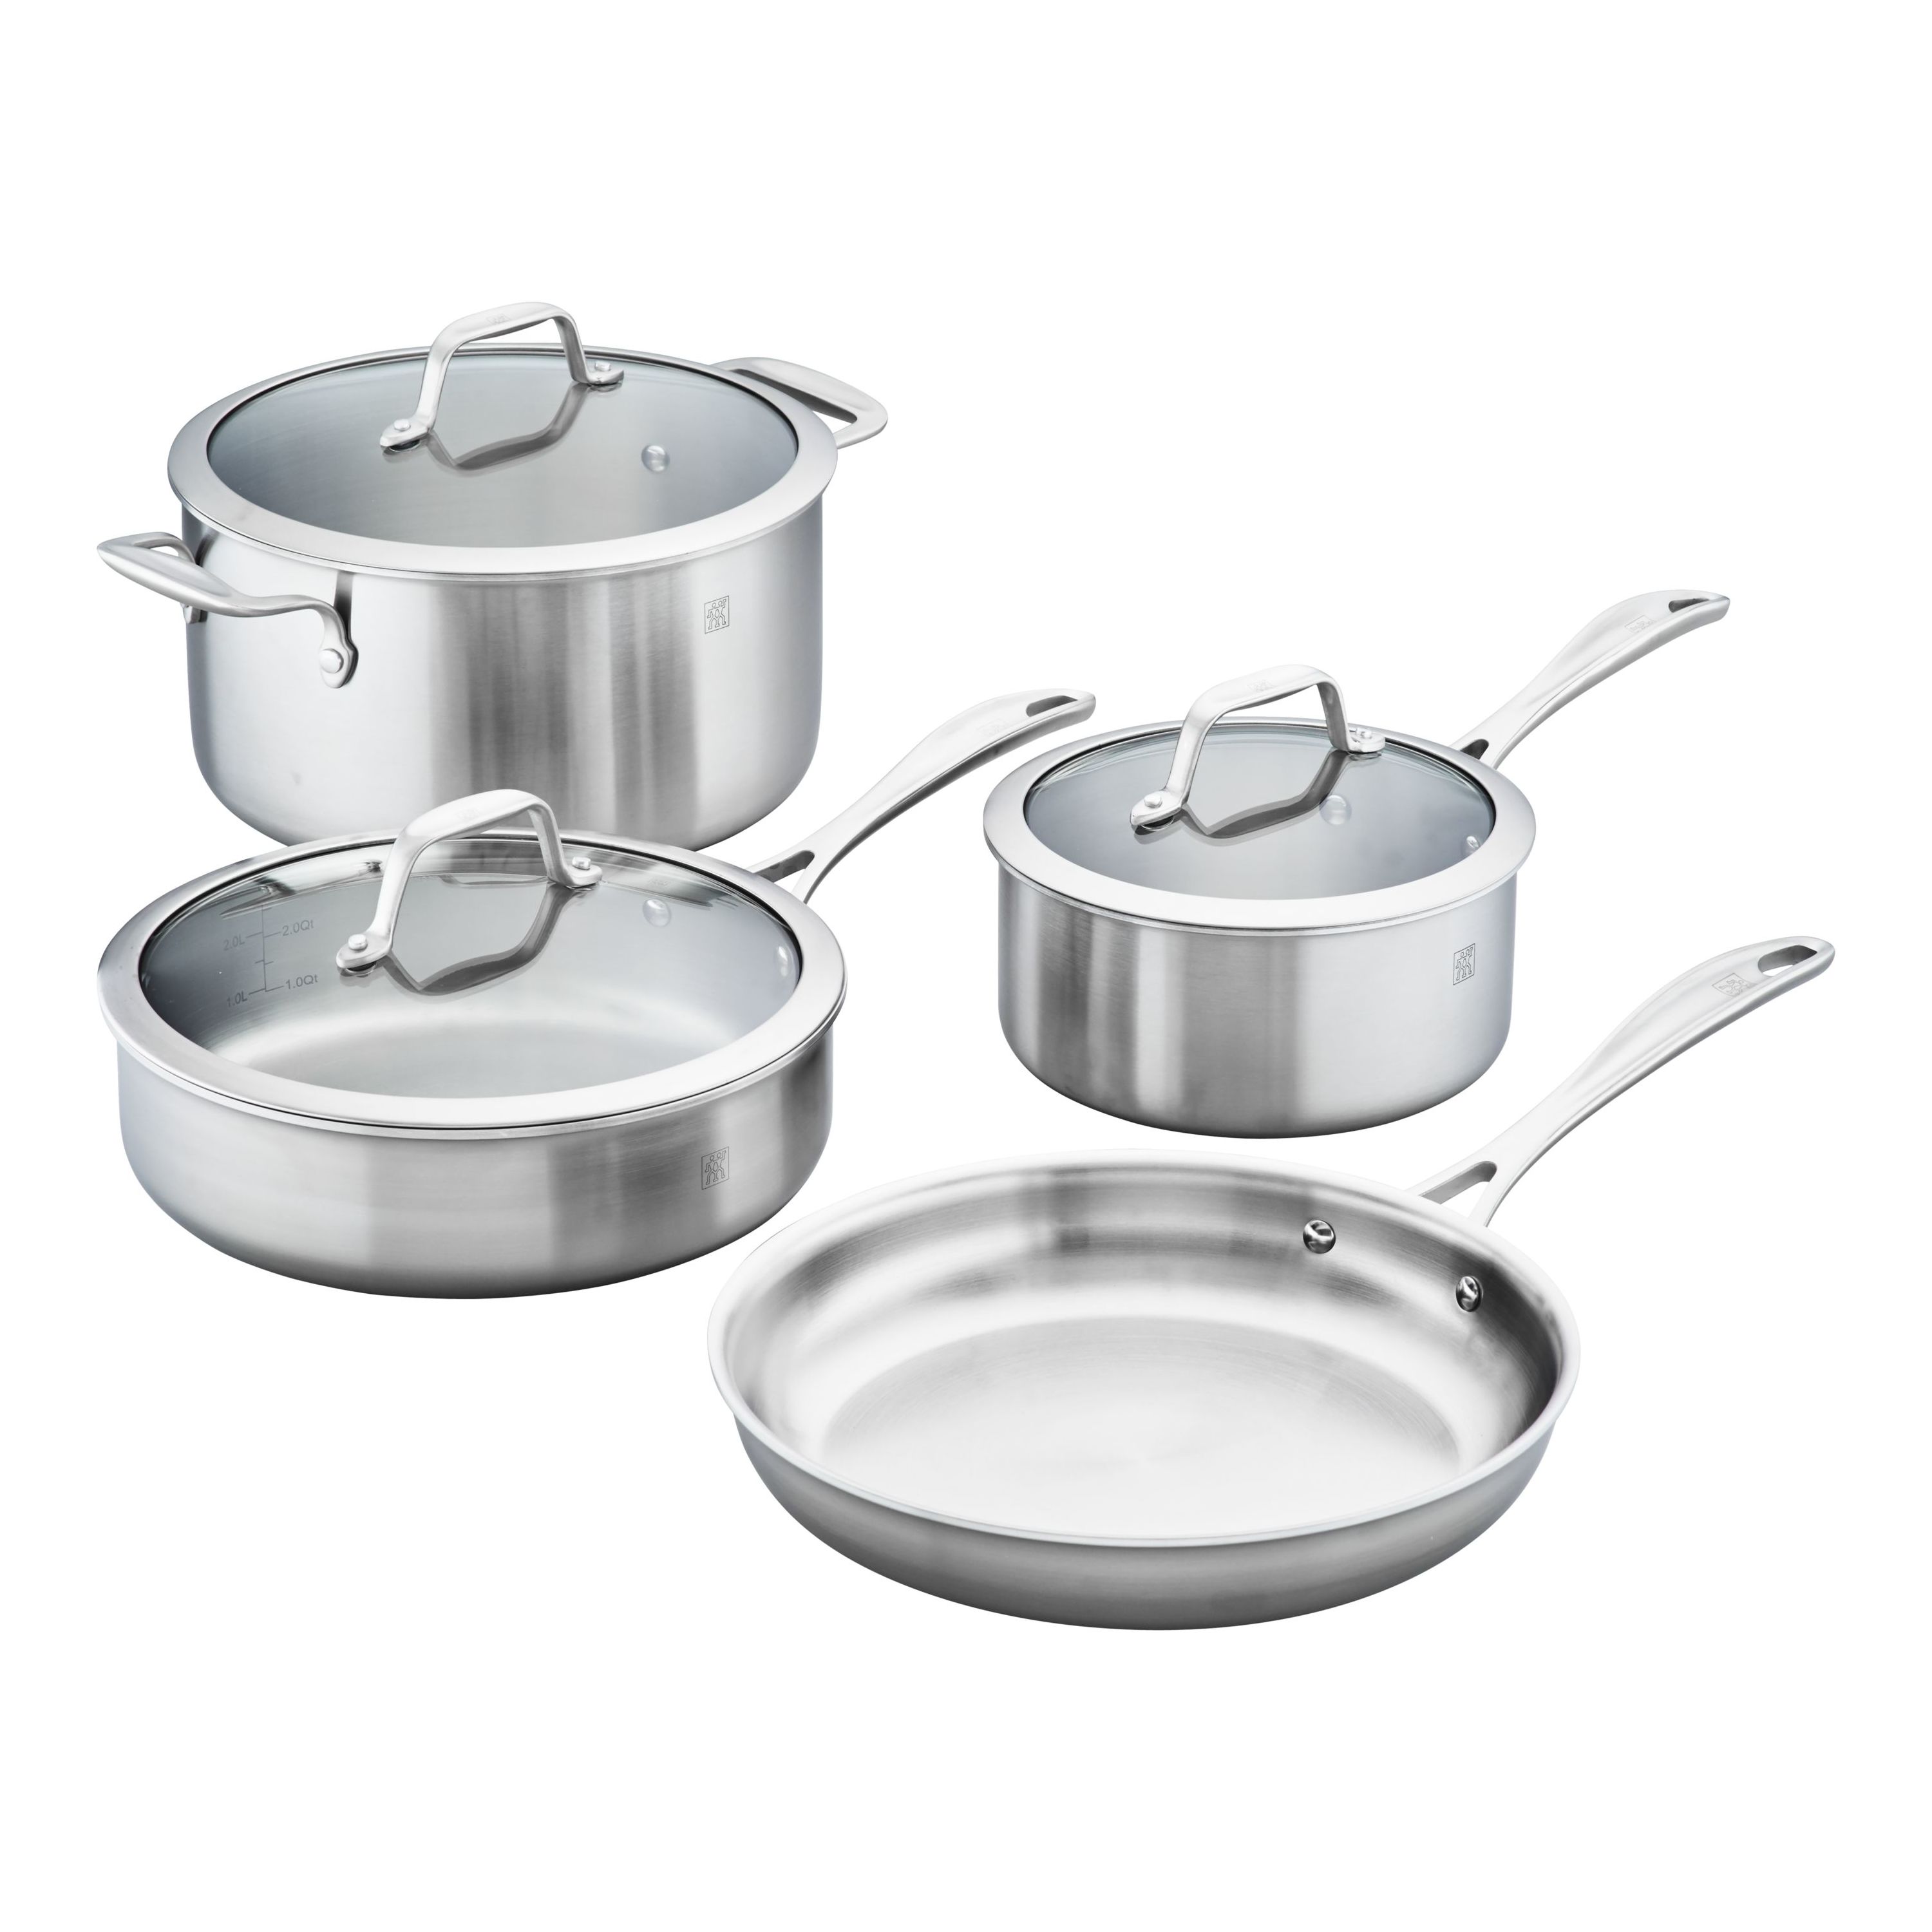 French Classic Tri-Ply Stainless Cookware 13 Piece Set 